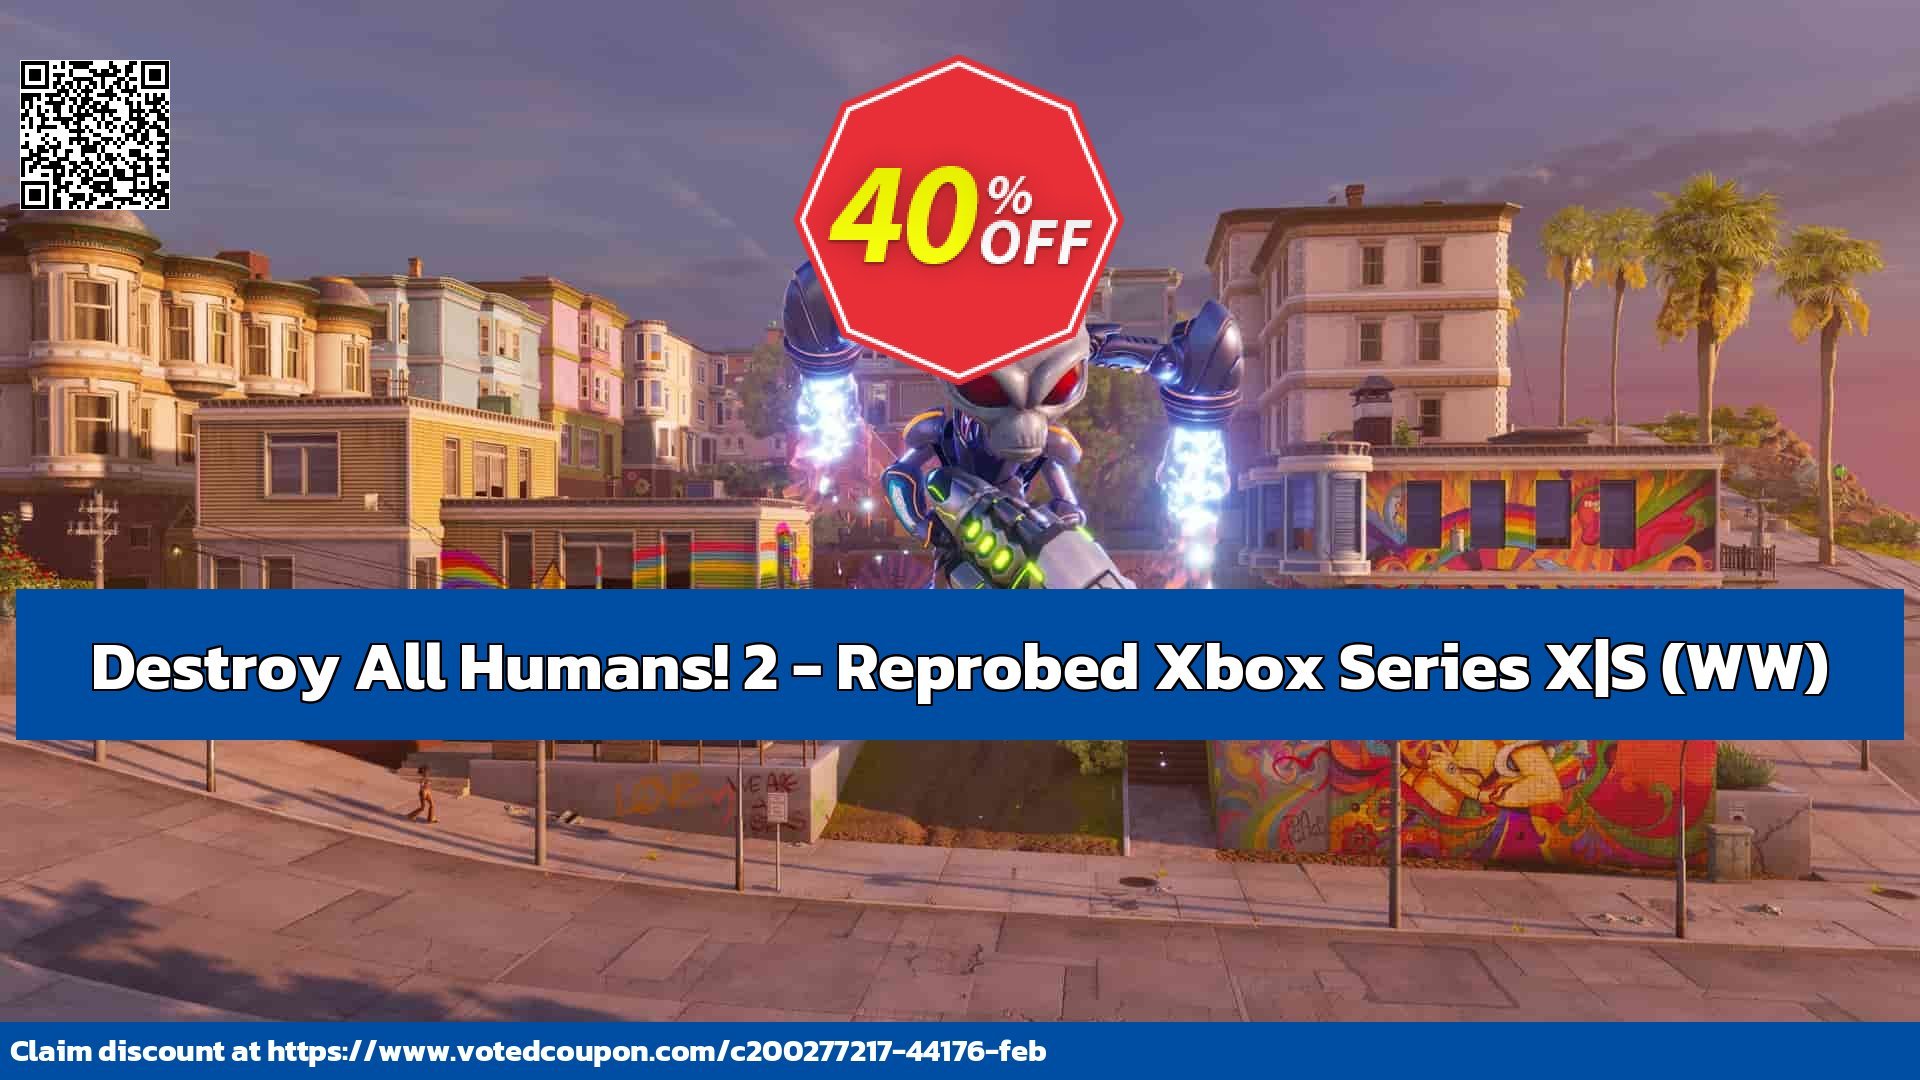 Destroy All Humans! 2 - Reprobed Xbox Series X|S, WW  voted-on promotion codes